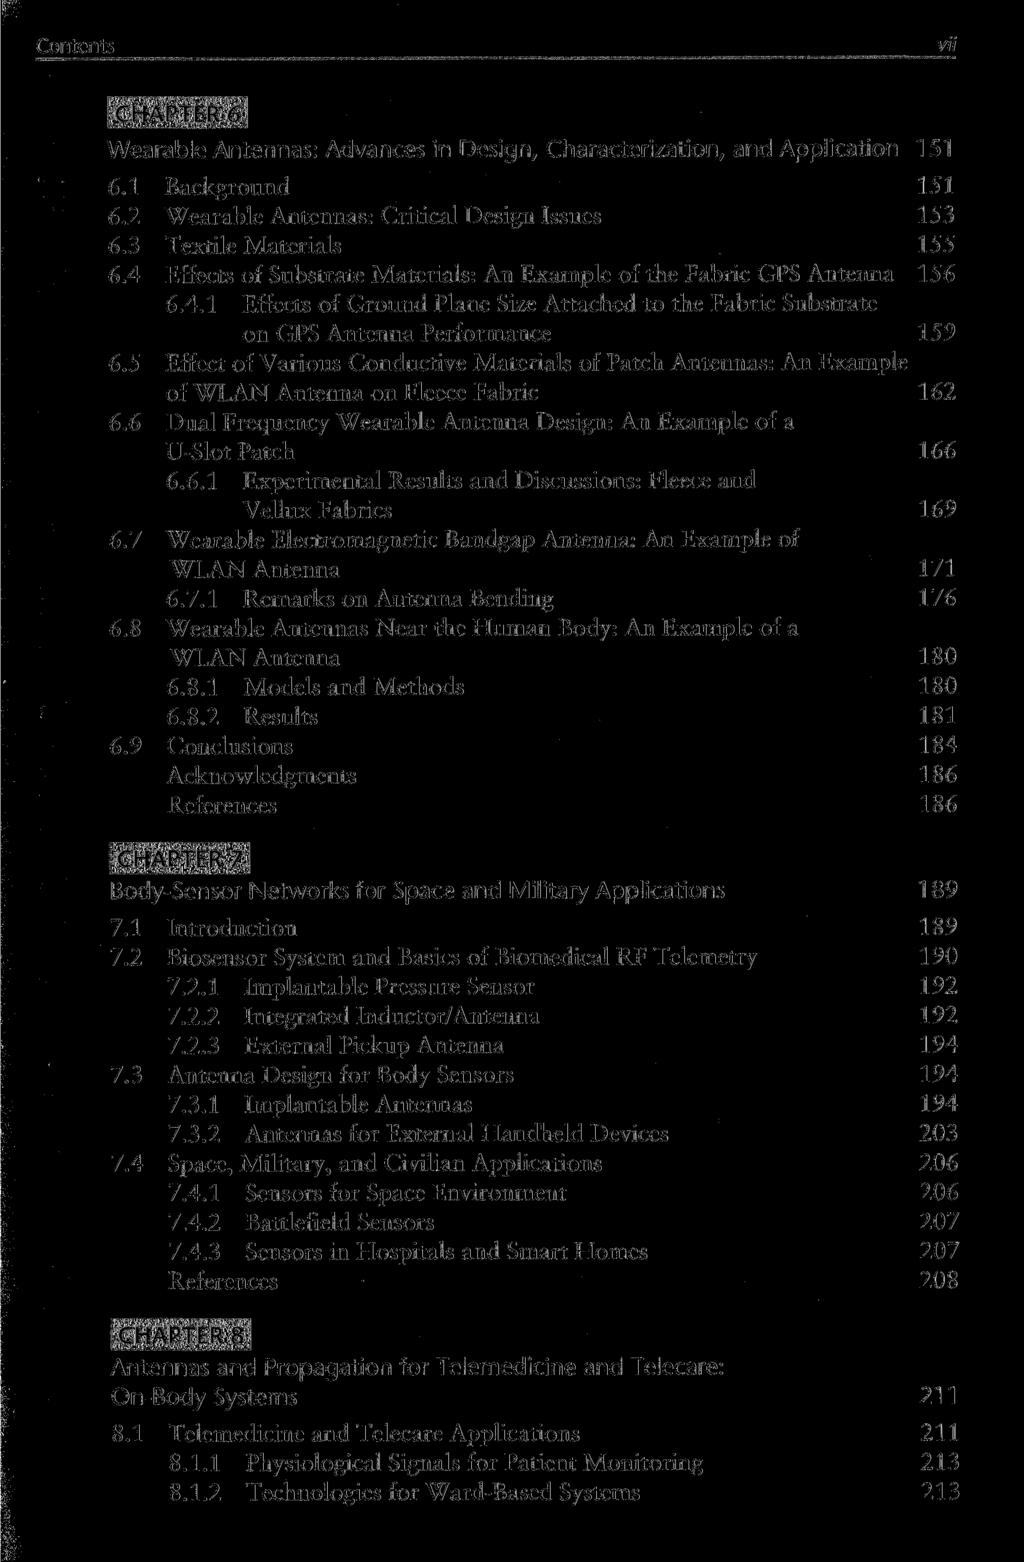 VII CHAPTER 6 Wearable Antennas: Advances in Design, Characterization, and Application 151 6.1 Background 151 6.2 Wearable Antennas: Critical Design Issues 153 6.3 Textile Materials 155 6.